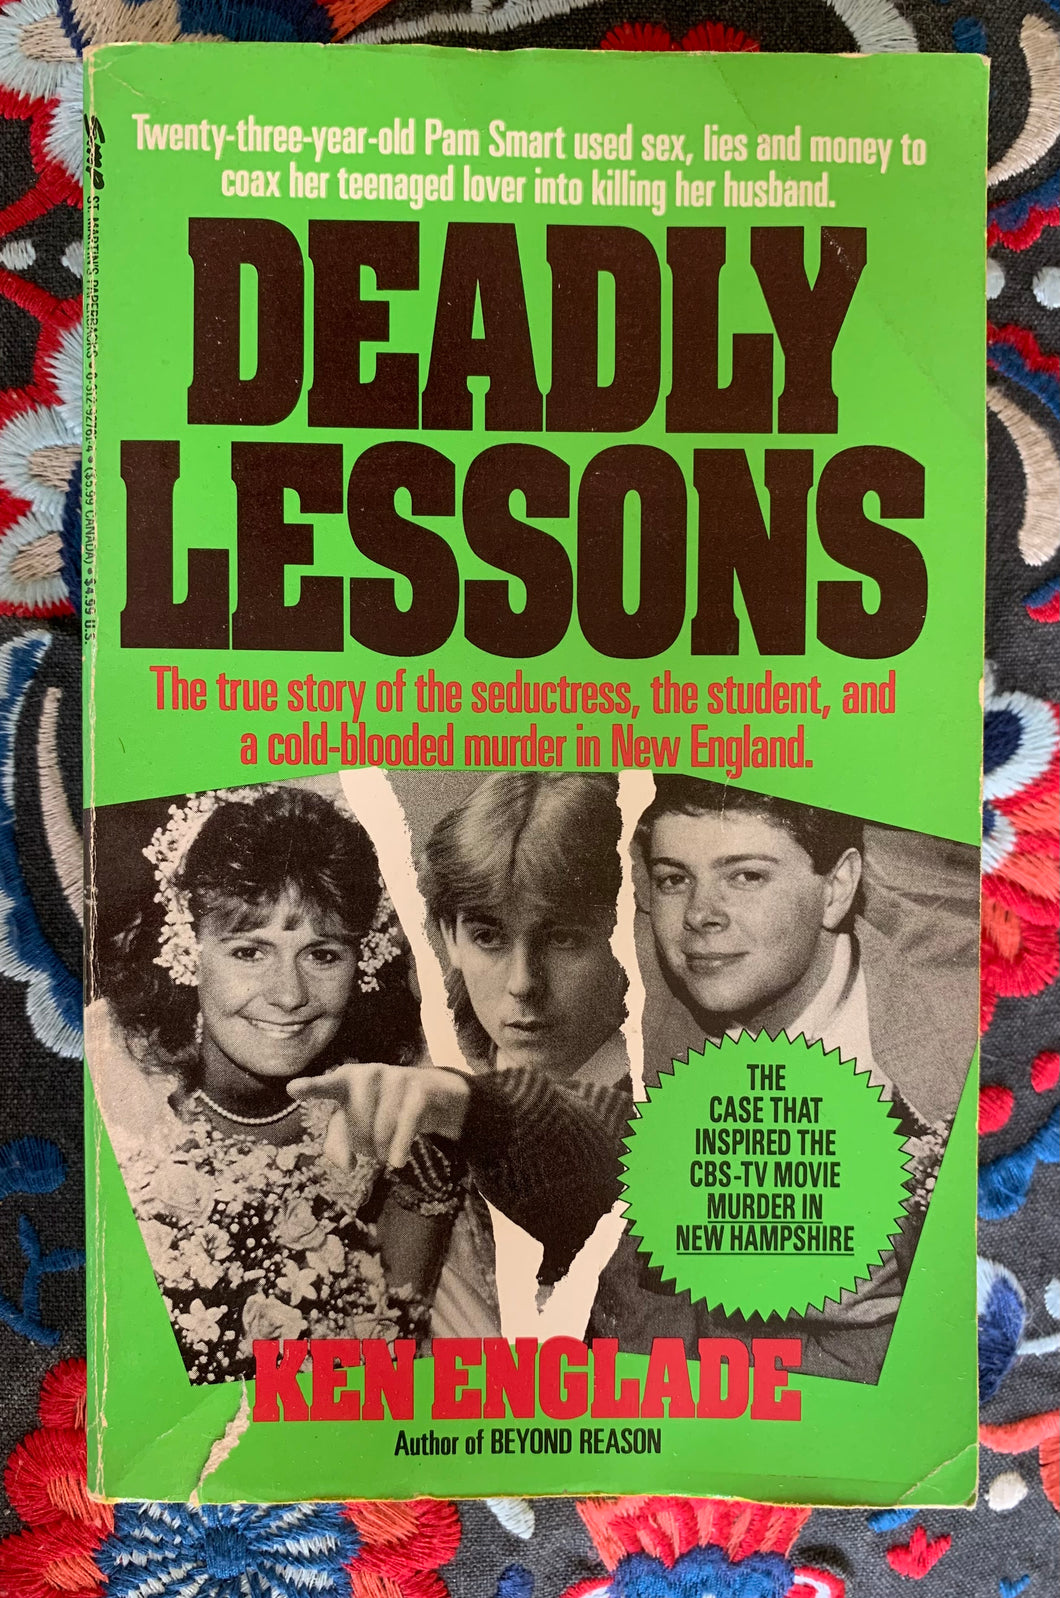 Deadly Lessons